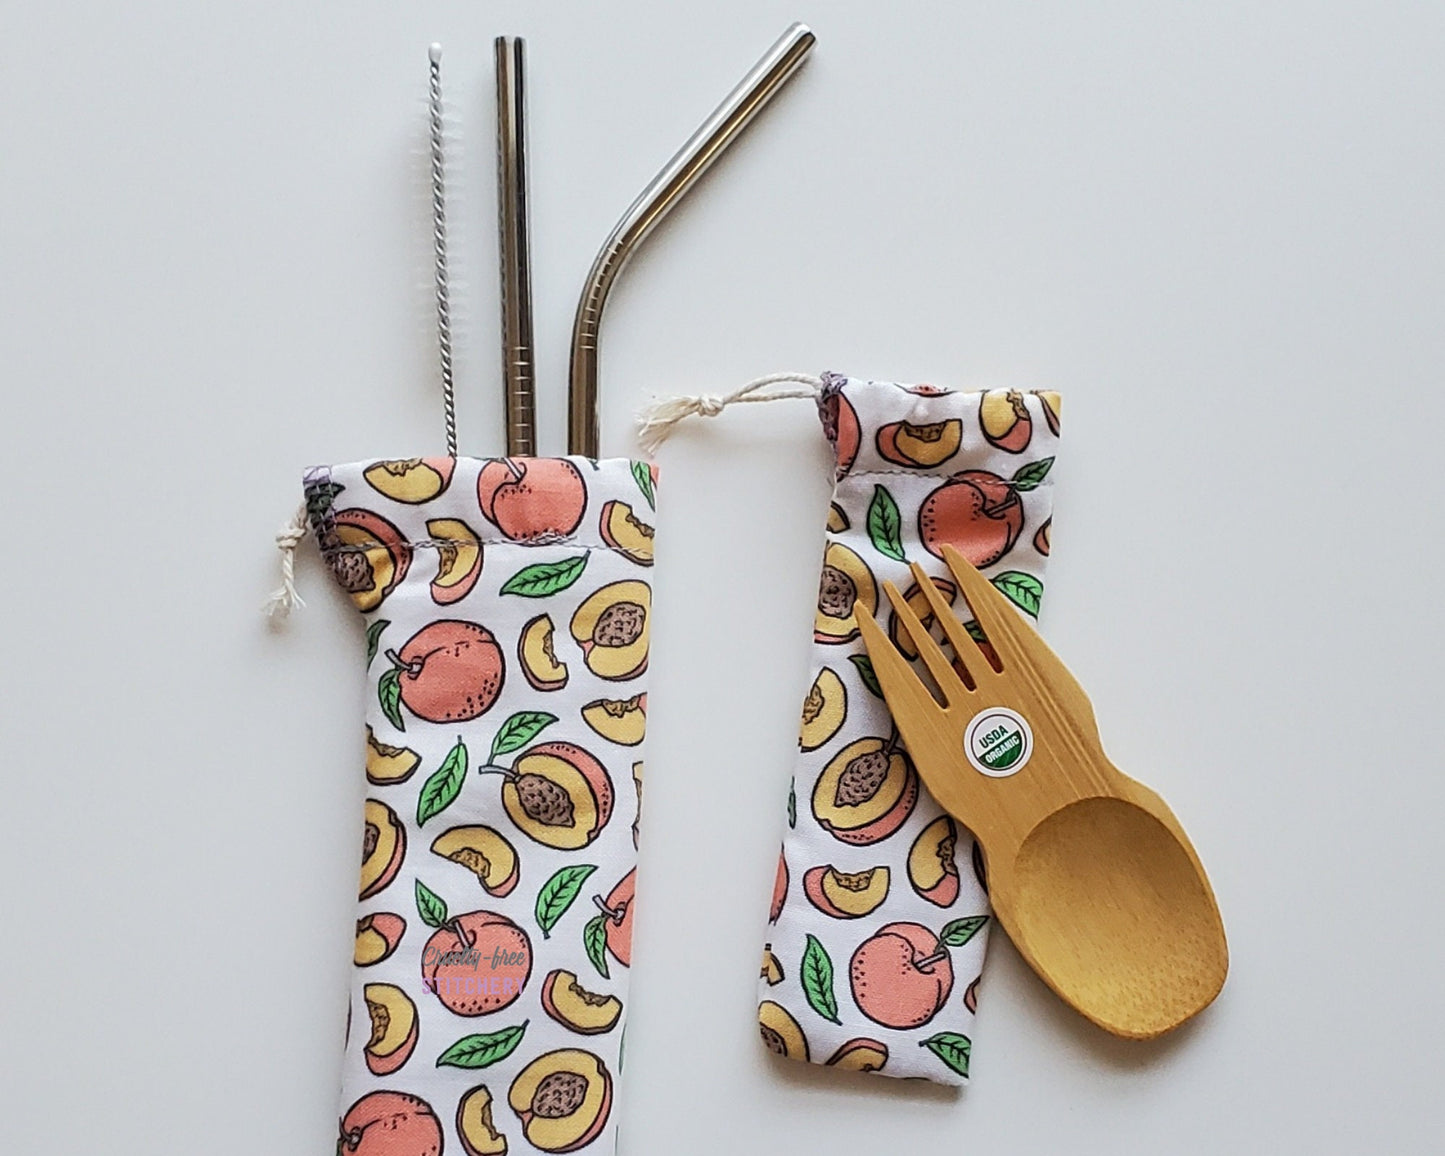 Reusable bamboo spork and stainless steel straw pouch set. The pouches are both white with small peaches all over. Some peaches are whole, others are cut in half or in slices, and some leaves are scattered around as well.